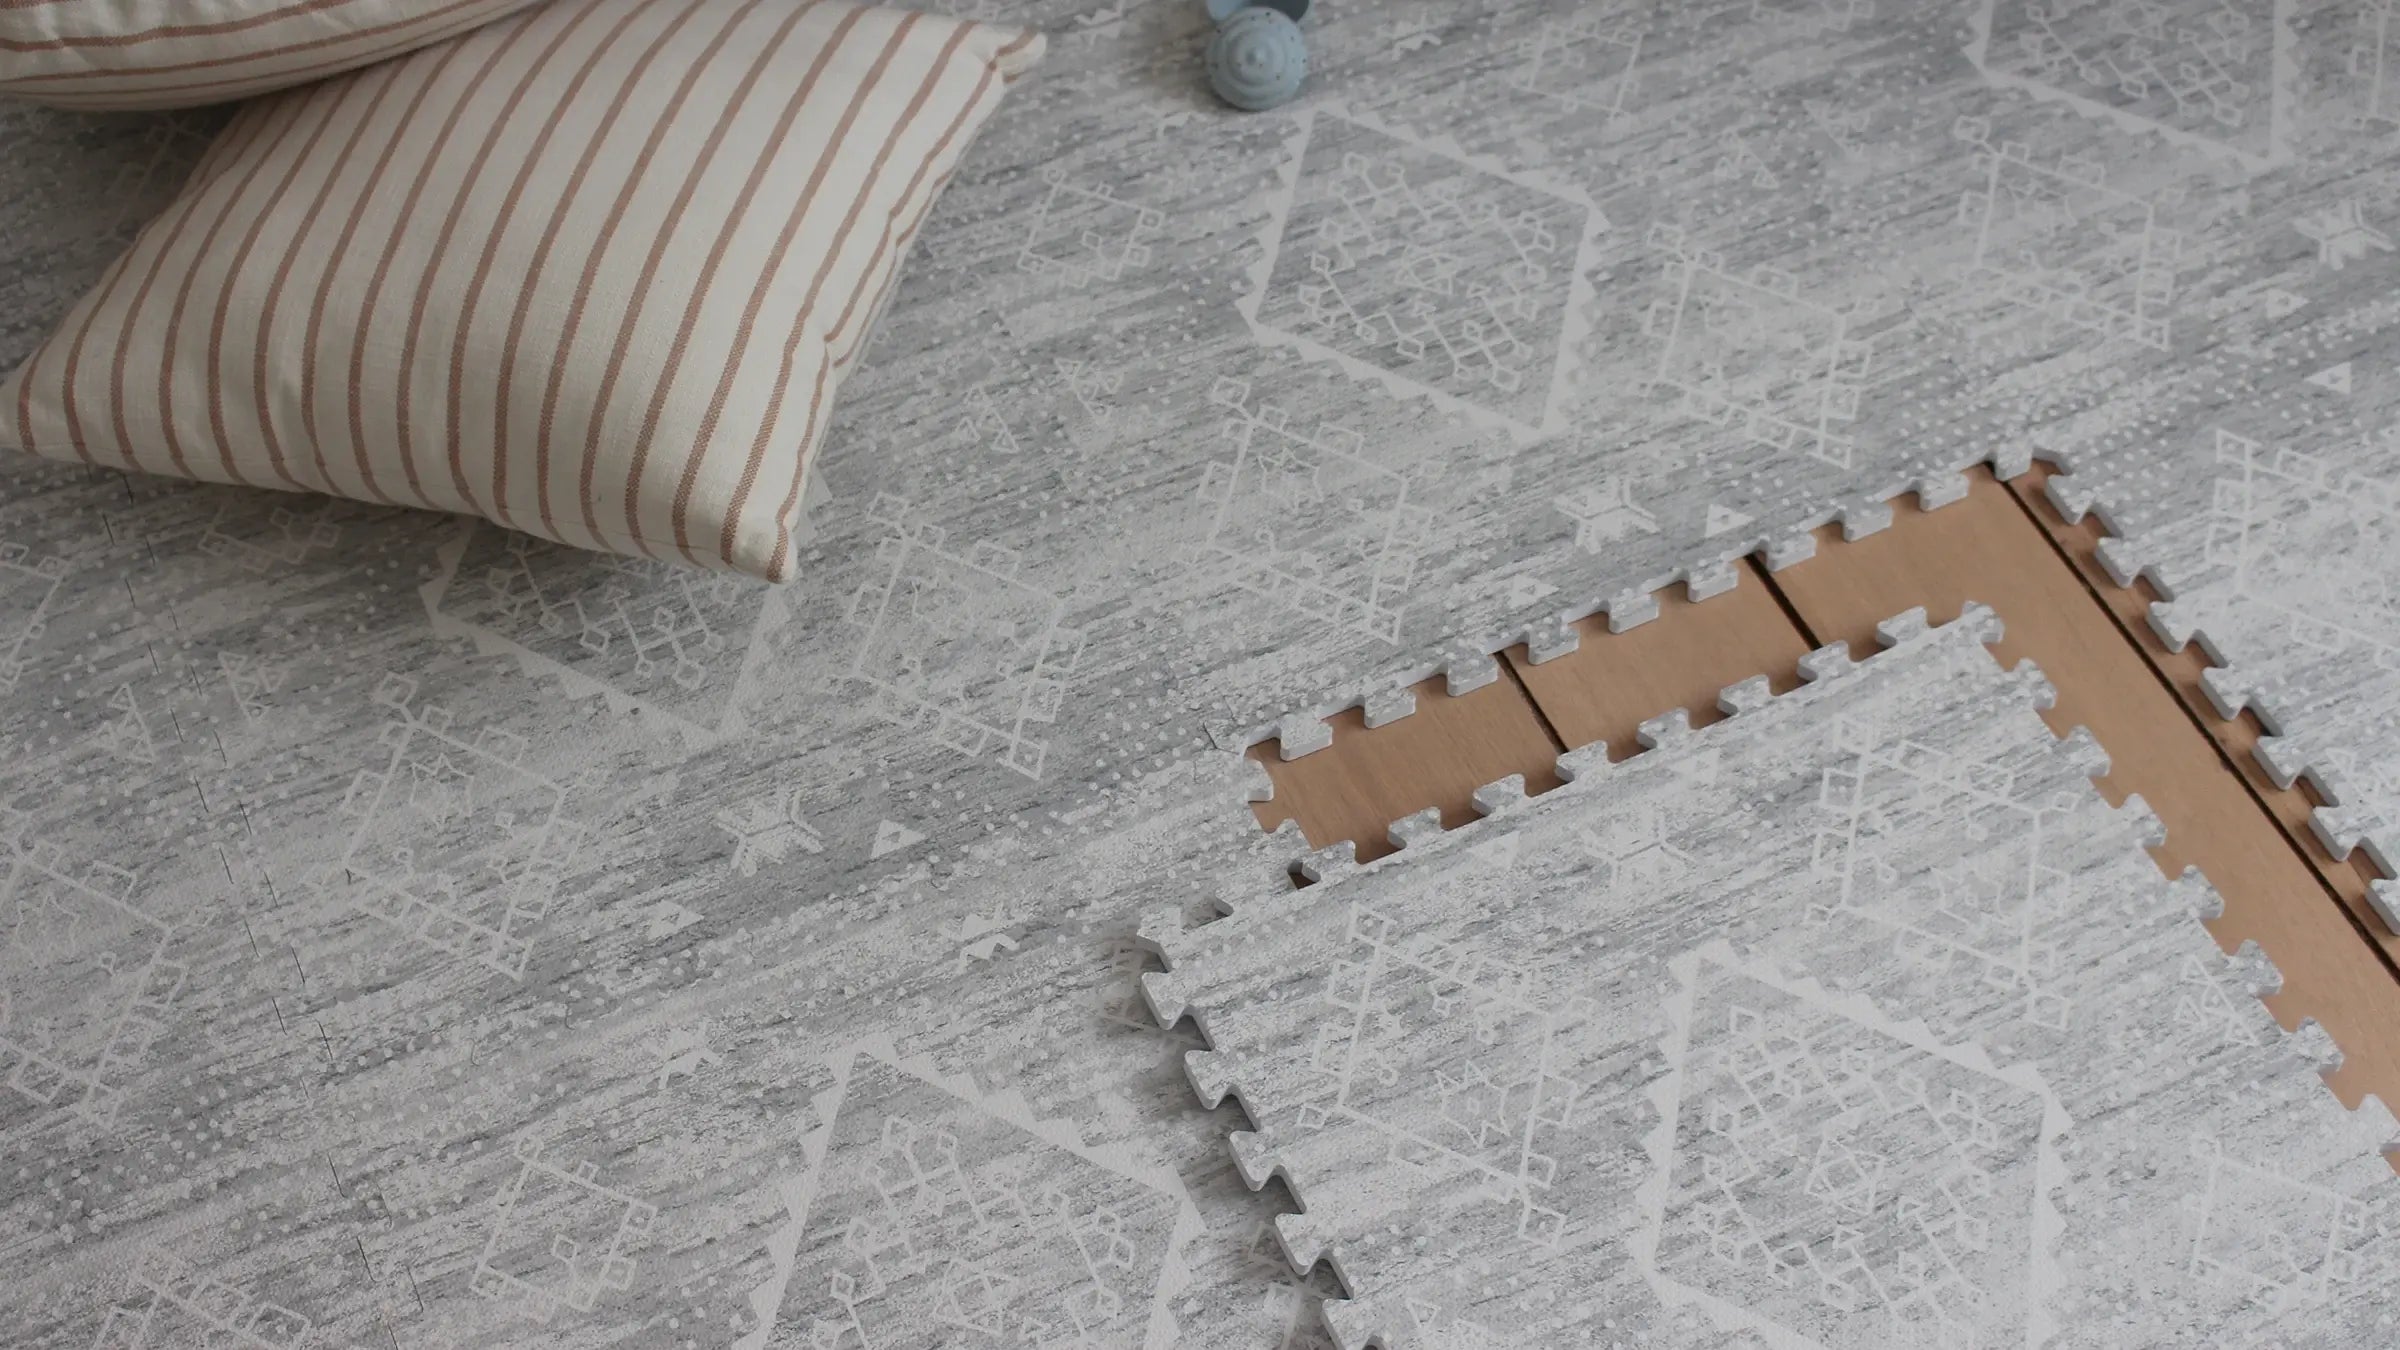 Ula gray boho pattern play mat with 1 tile exposed and tan and white stripe pillow on the mat